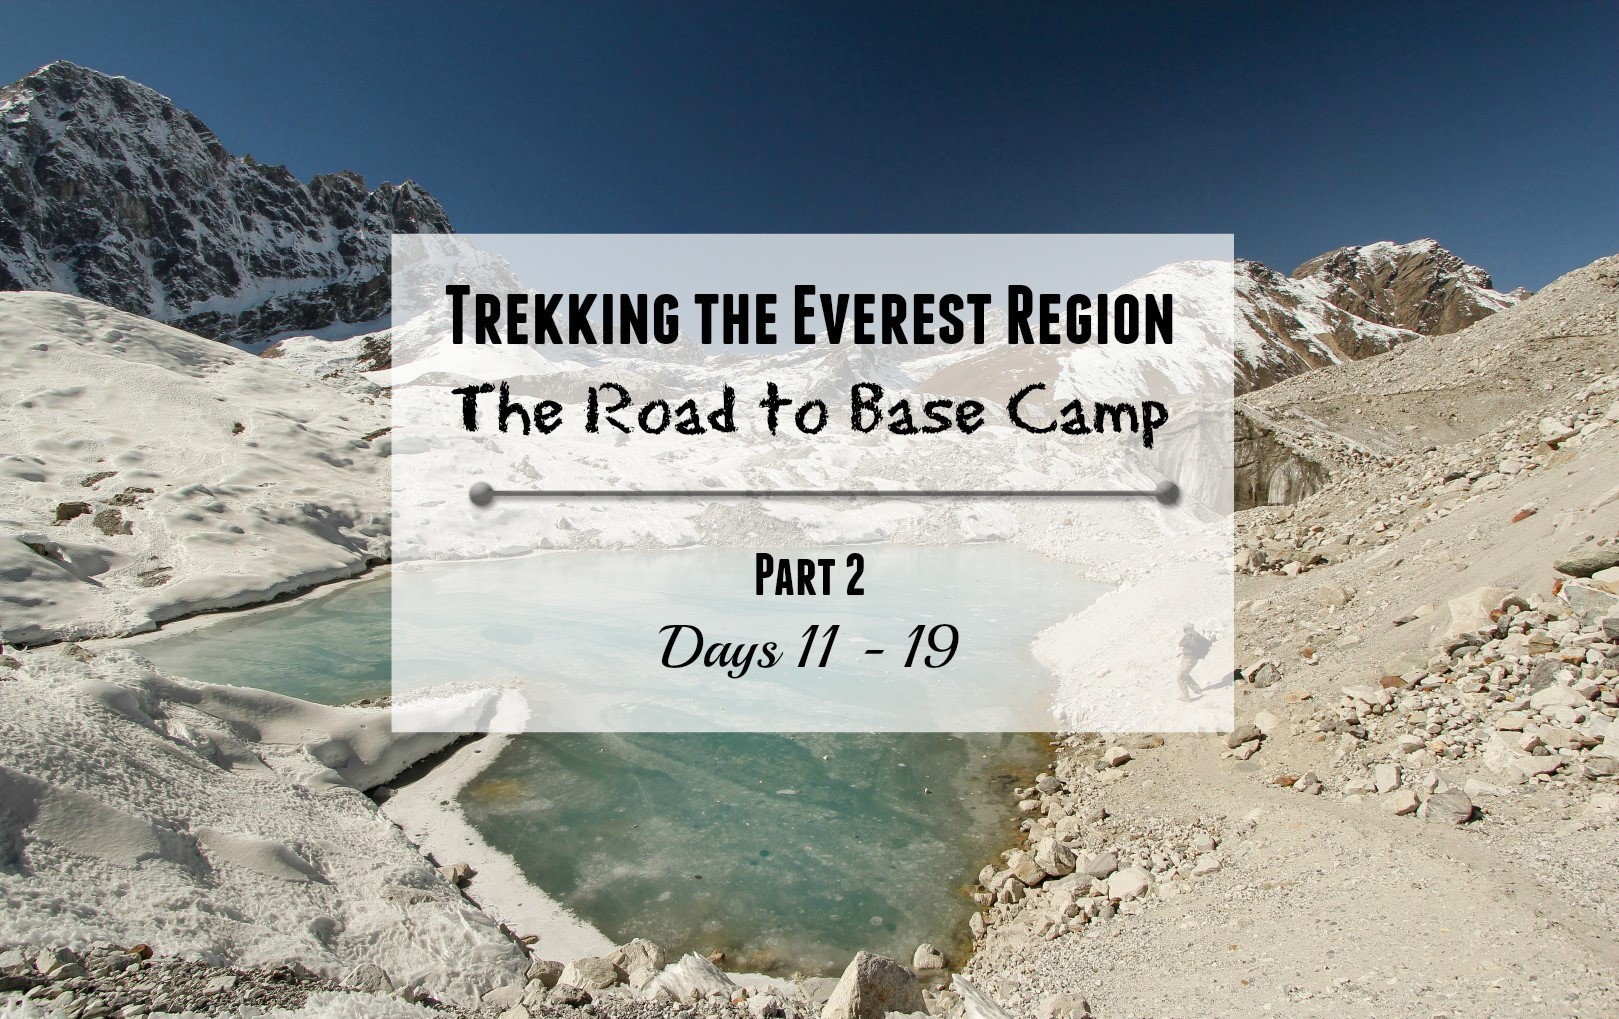 Trekking the Everest Region – The Road to Base Camp Part 2 (Days 11 to 19)